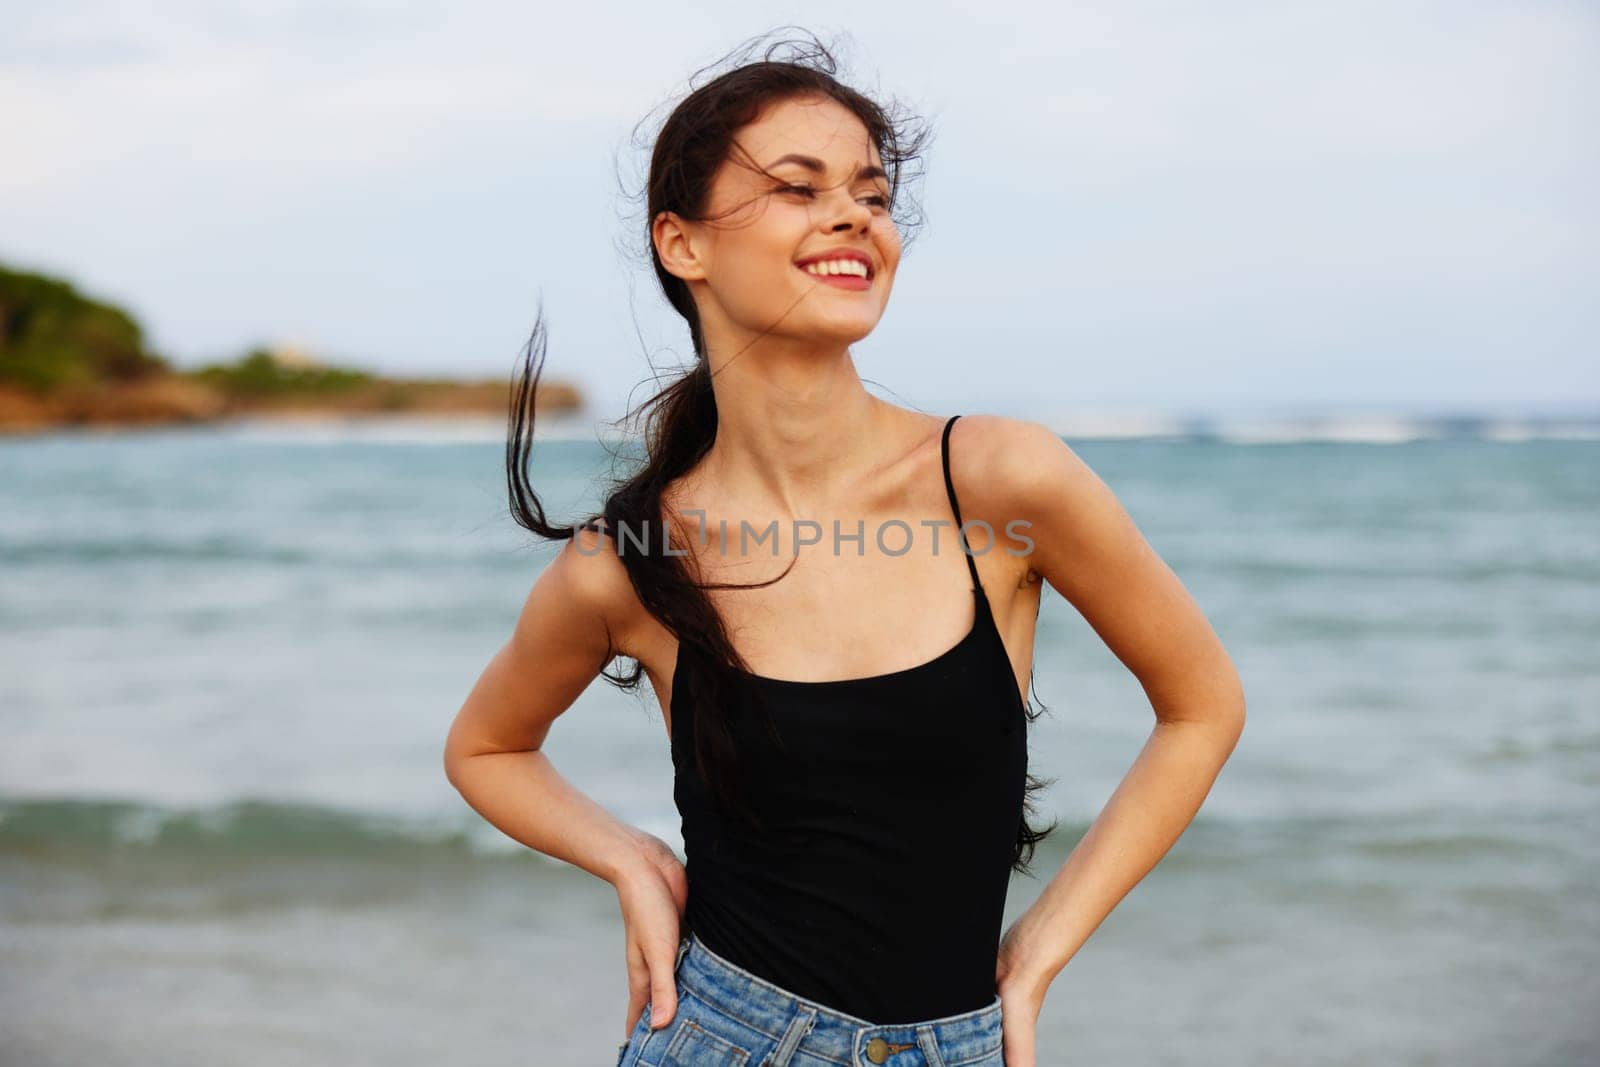 woman sea sun carefree copy-space freedom happiness person summer smile happy vacation coast peaceful lifestyle ocean sand caucasian sunset beach tropical